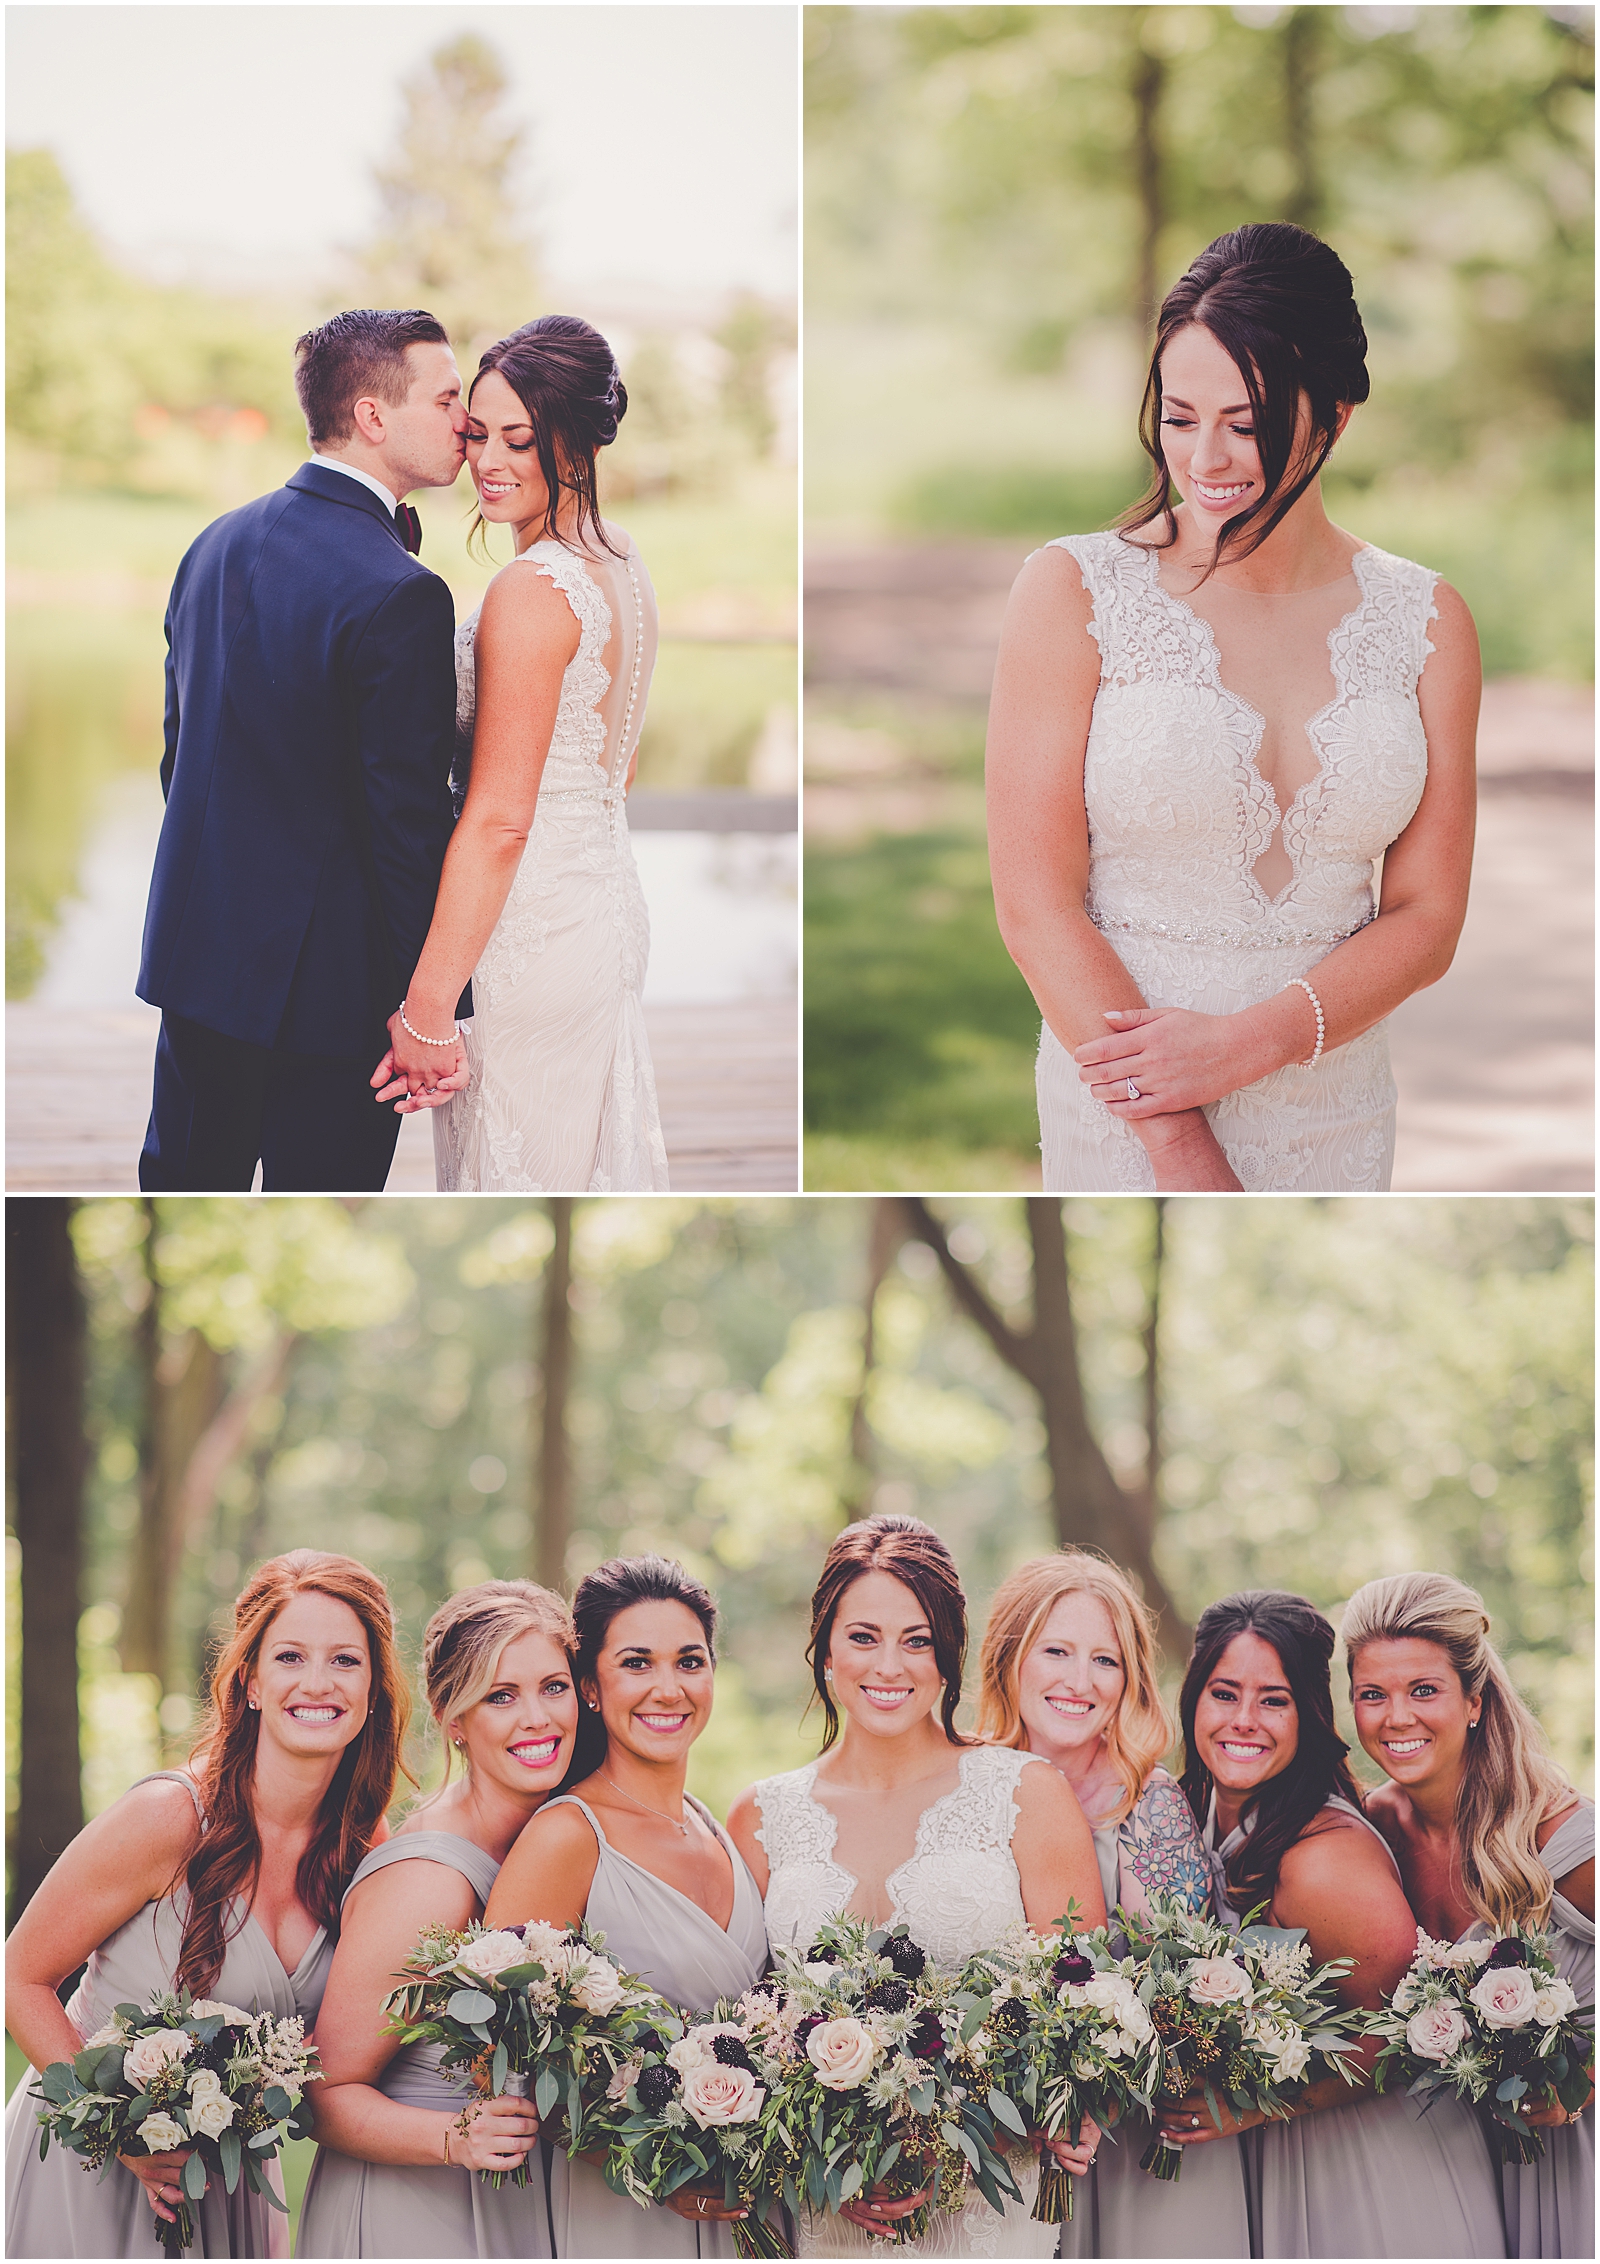 Top ten ways to have picture-perfect hair on your wedding with Megan Jarabe - guest blogger with Chicagoland wedding photographer Kara Evans Photographer.